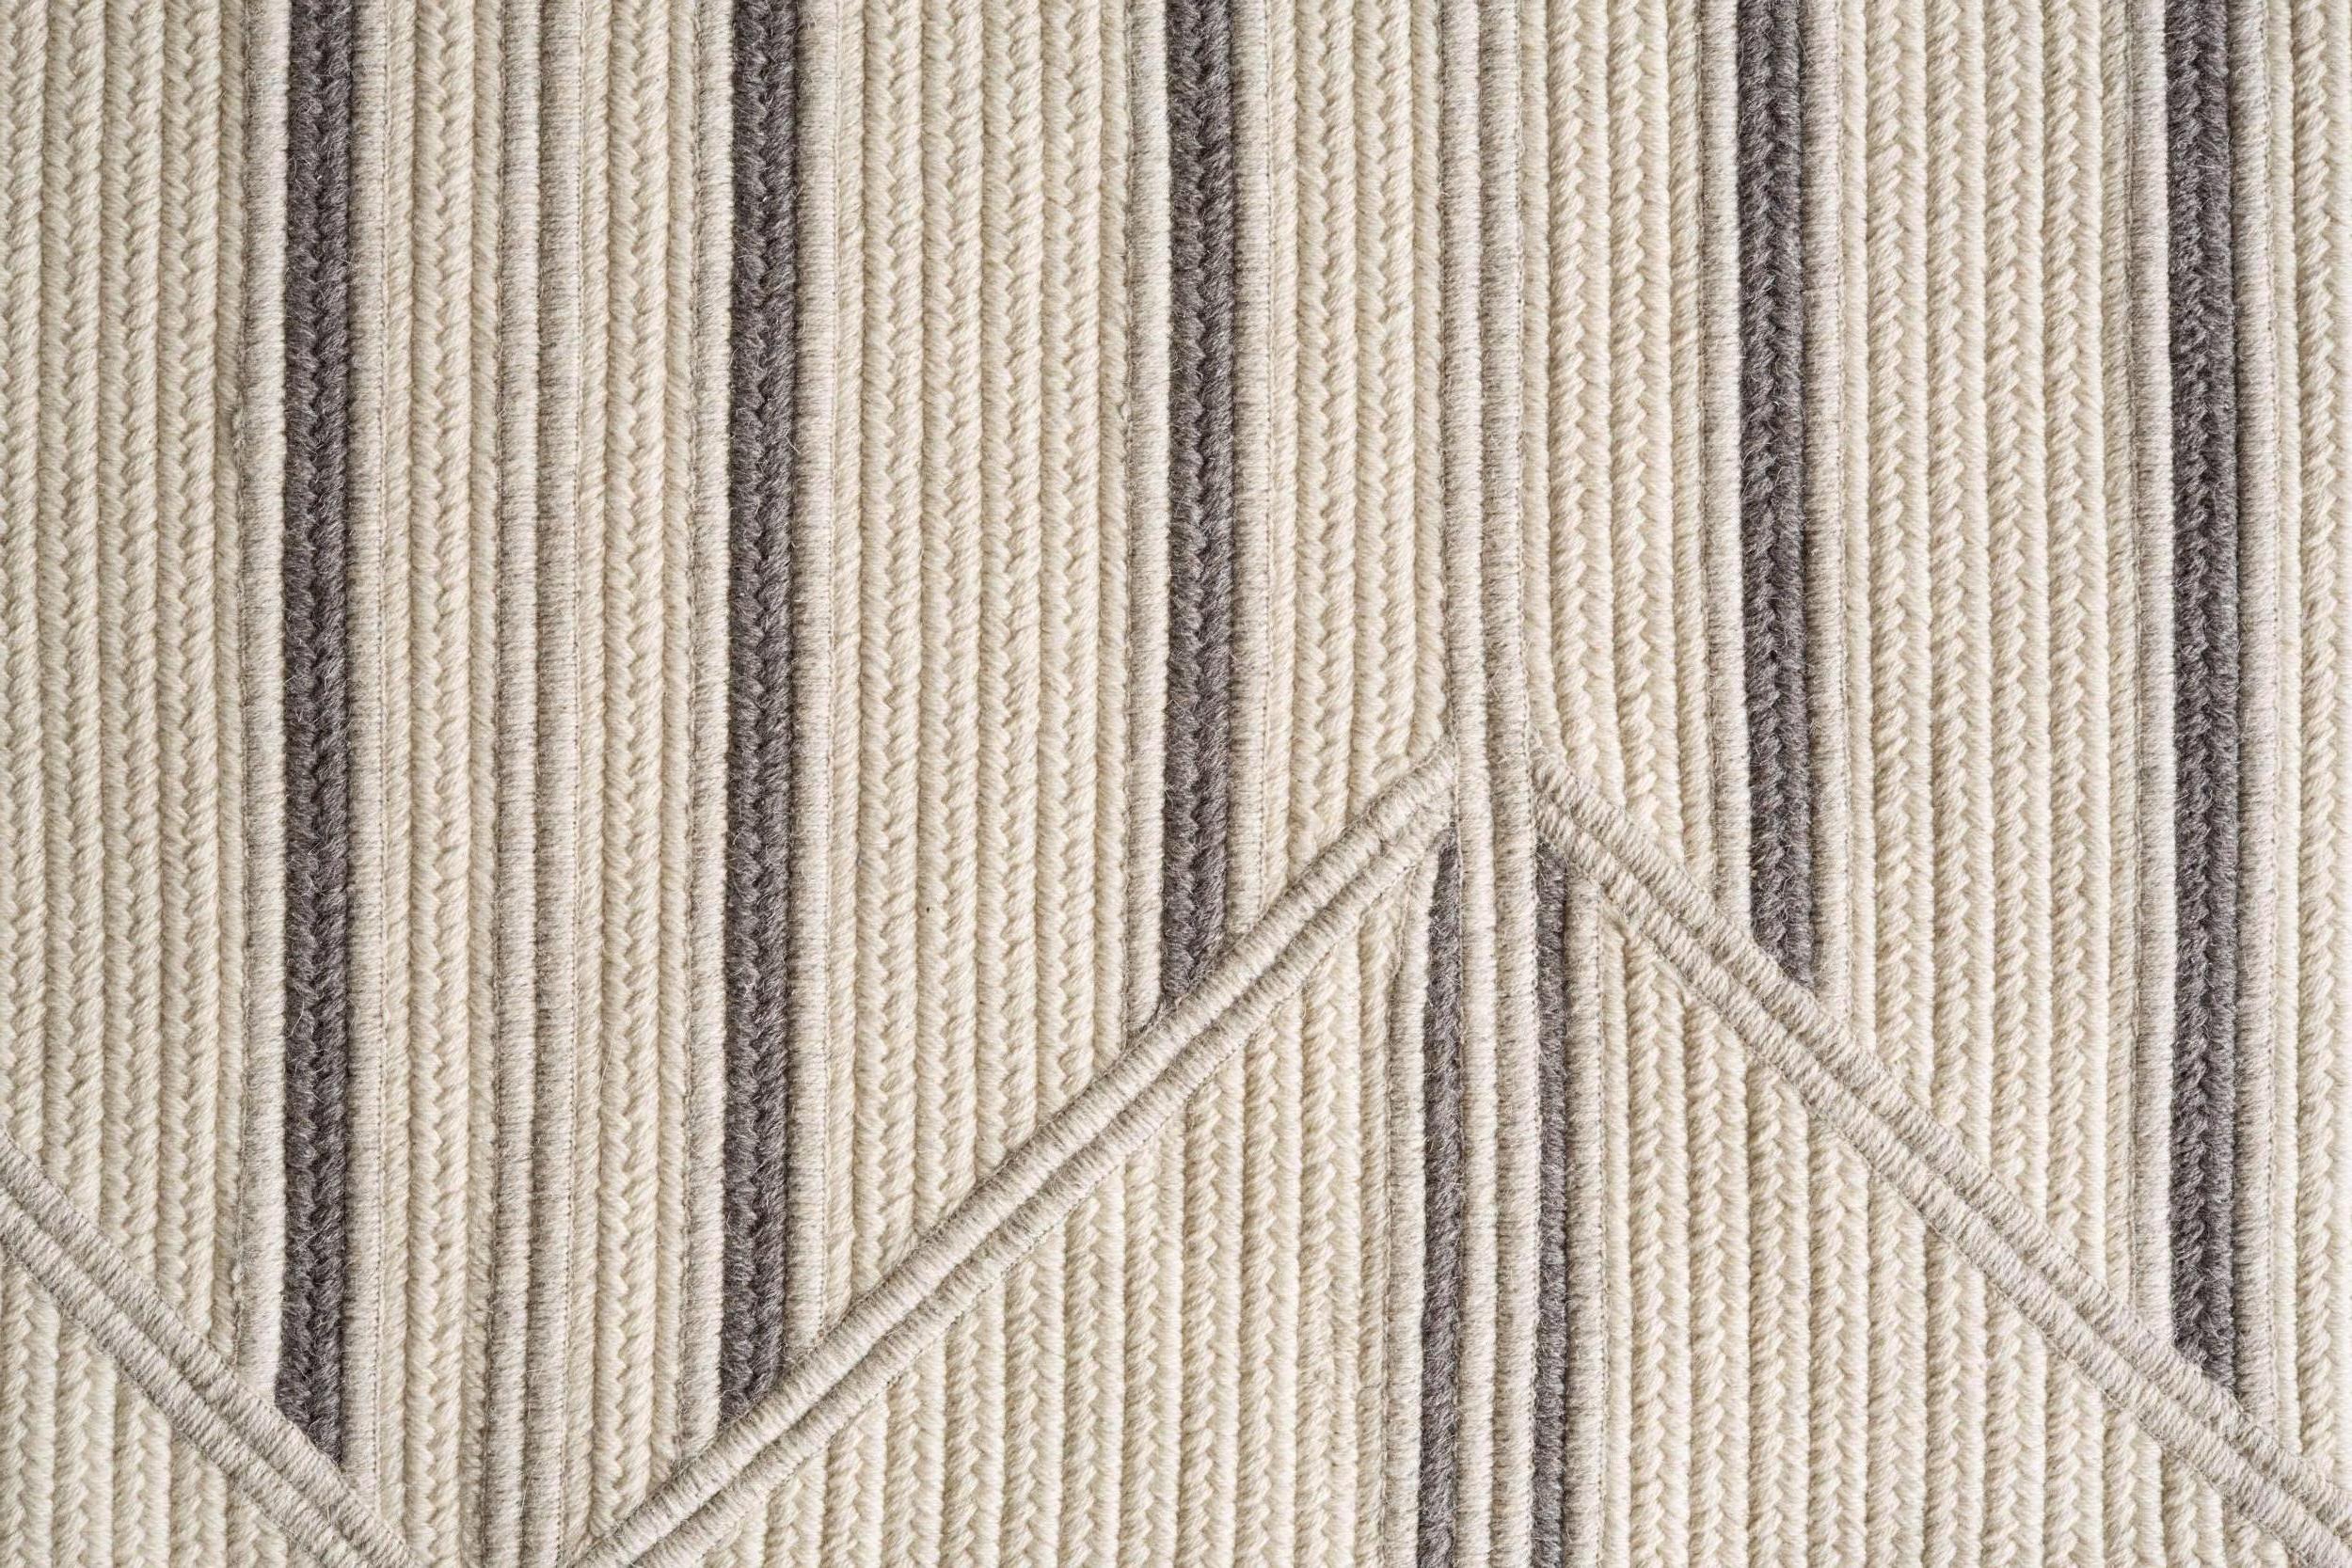 Inlay Grey and Cream Natural Un-Dyed Wool Geometric Stripe 8'x10' Rectangle Rug. A finishing technique within the rug creates shifts in line and texture. Pieces are cut and sewn in cream, light grey and dark grey tones of natural un-dyed